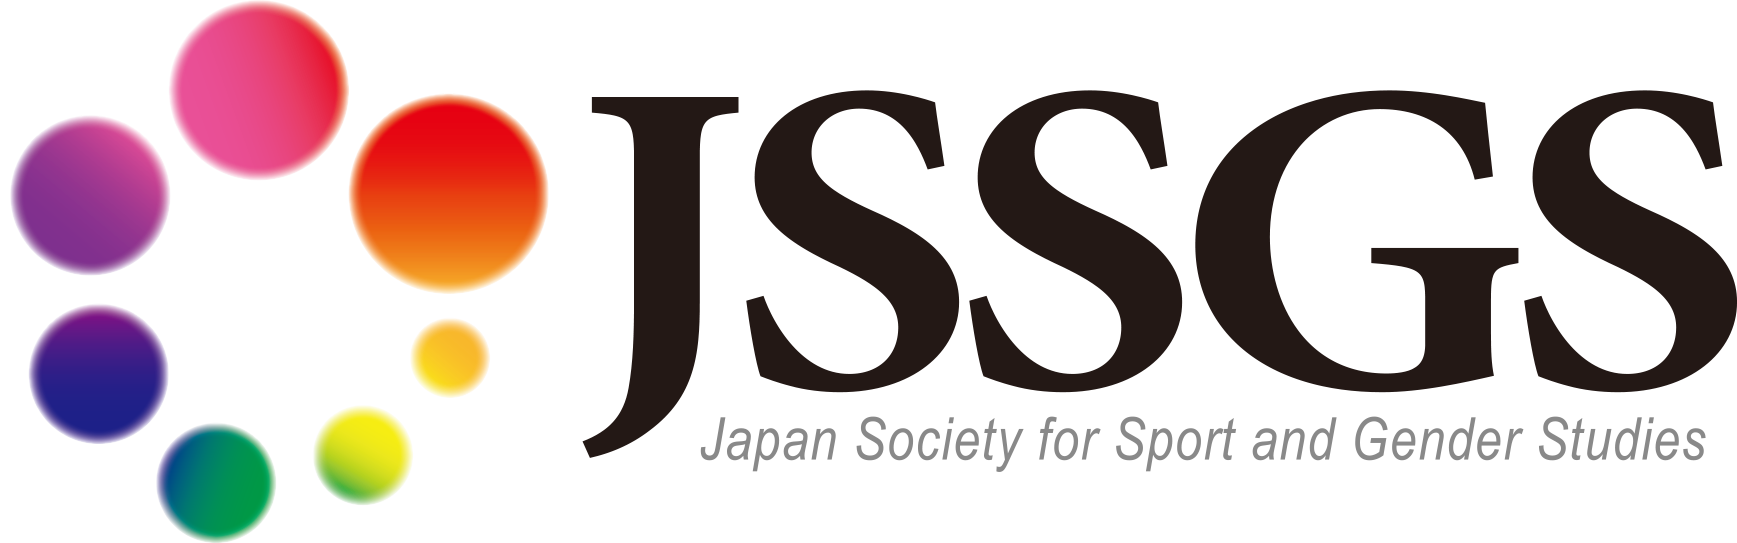 Japan Society for Sport and Gender Studies